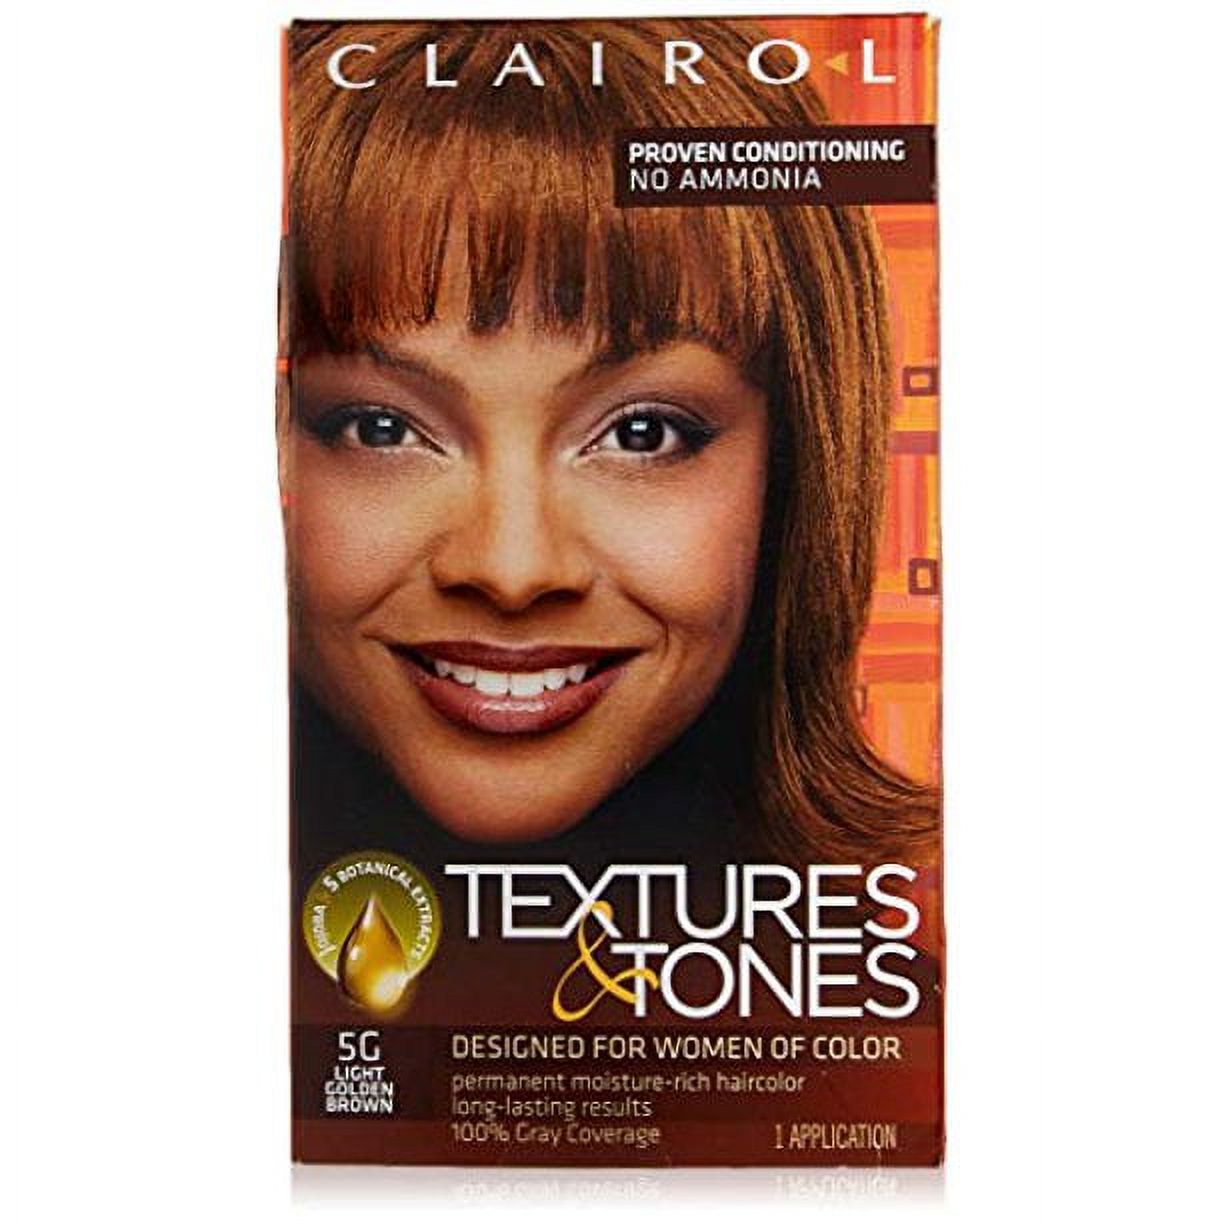 Clairol Textures And Tones Hair Dye Ammonia Free Permanent Hair Color 5g Light Golden Brown